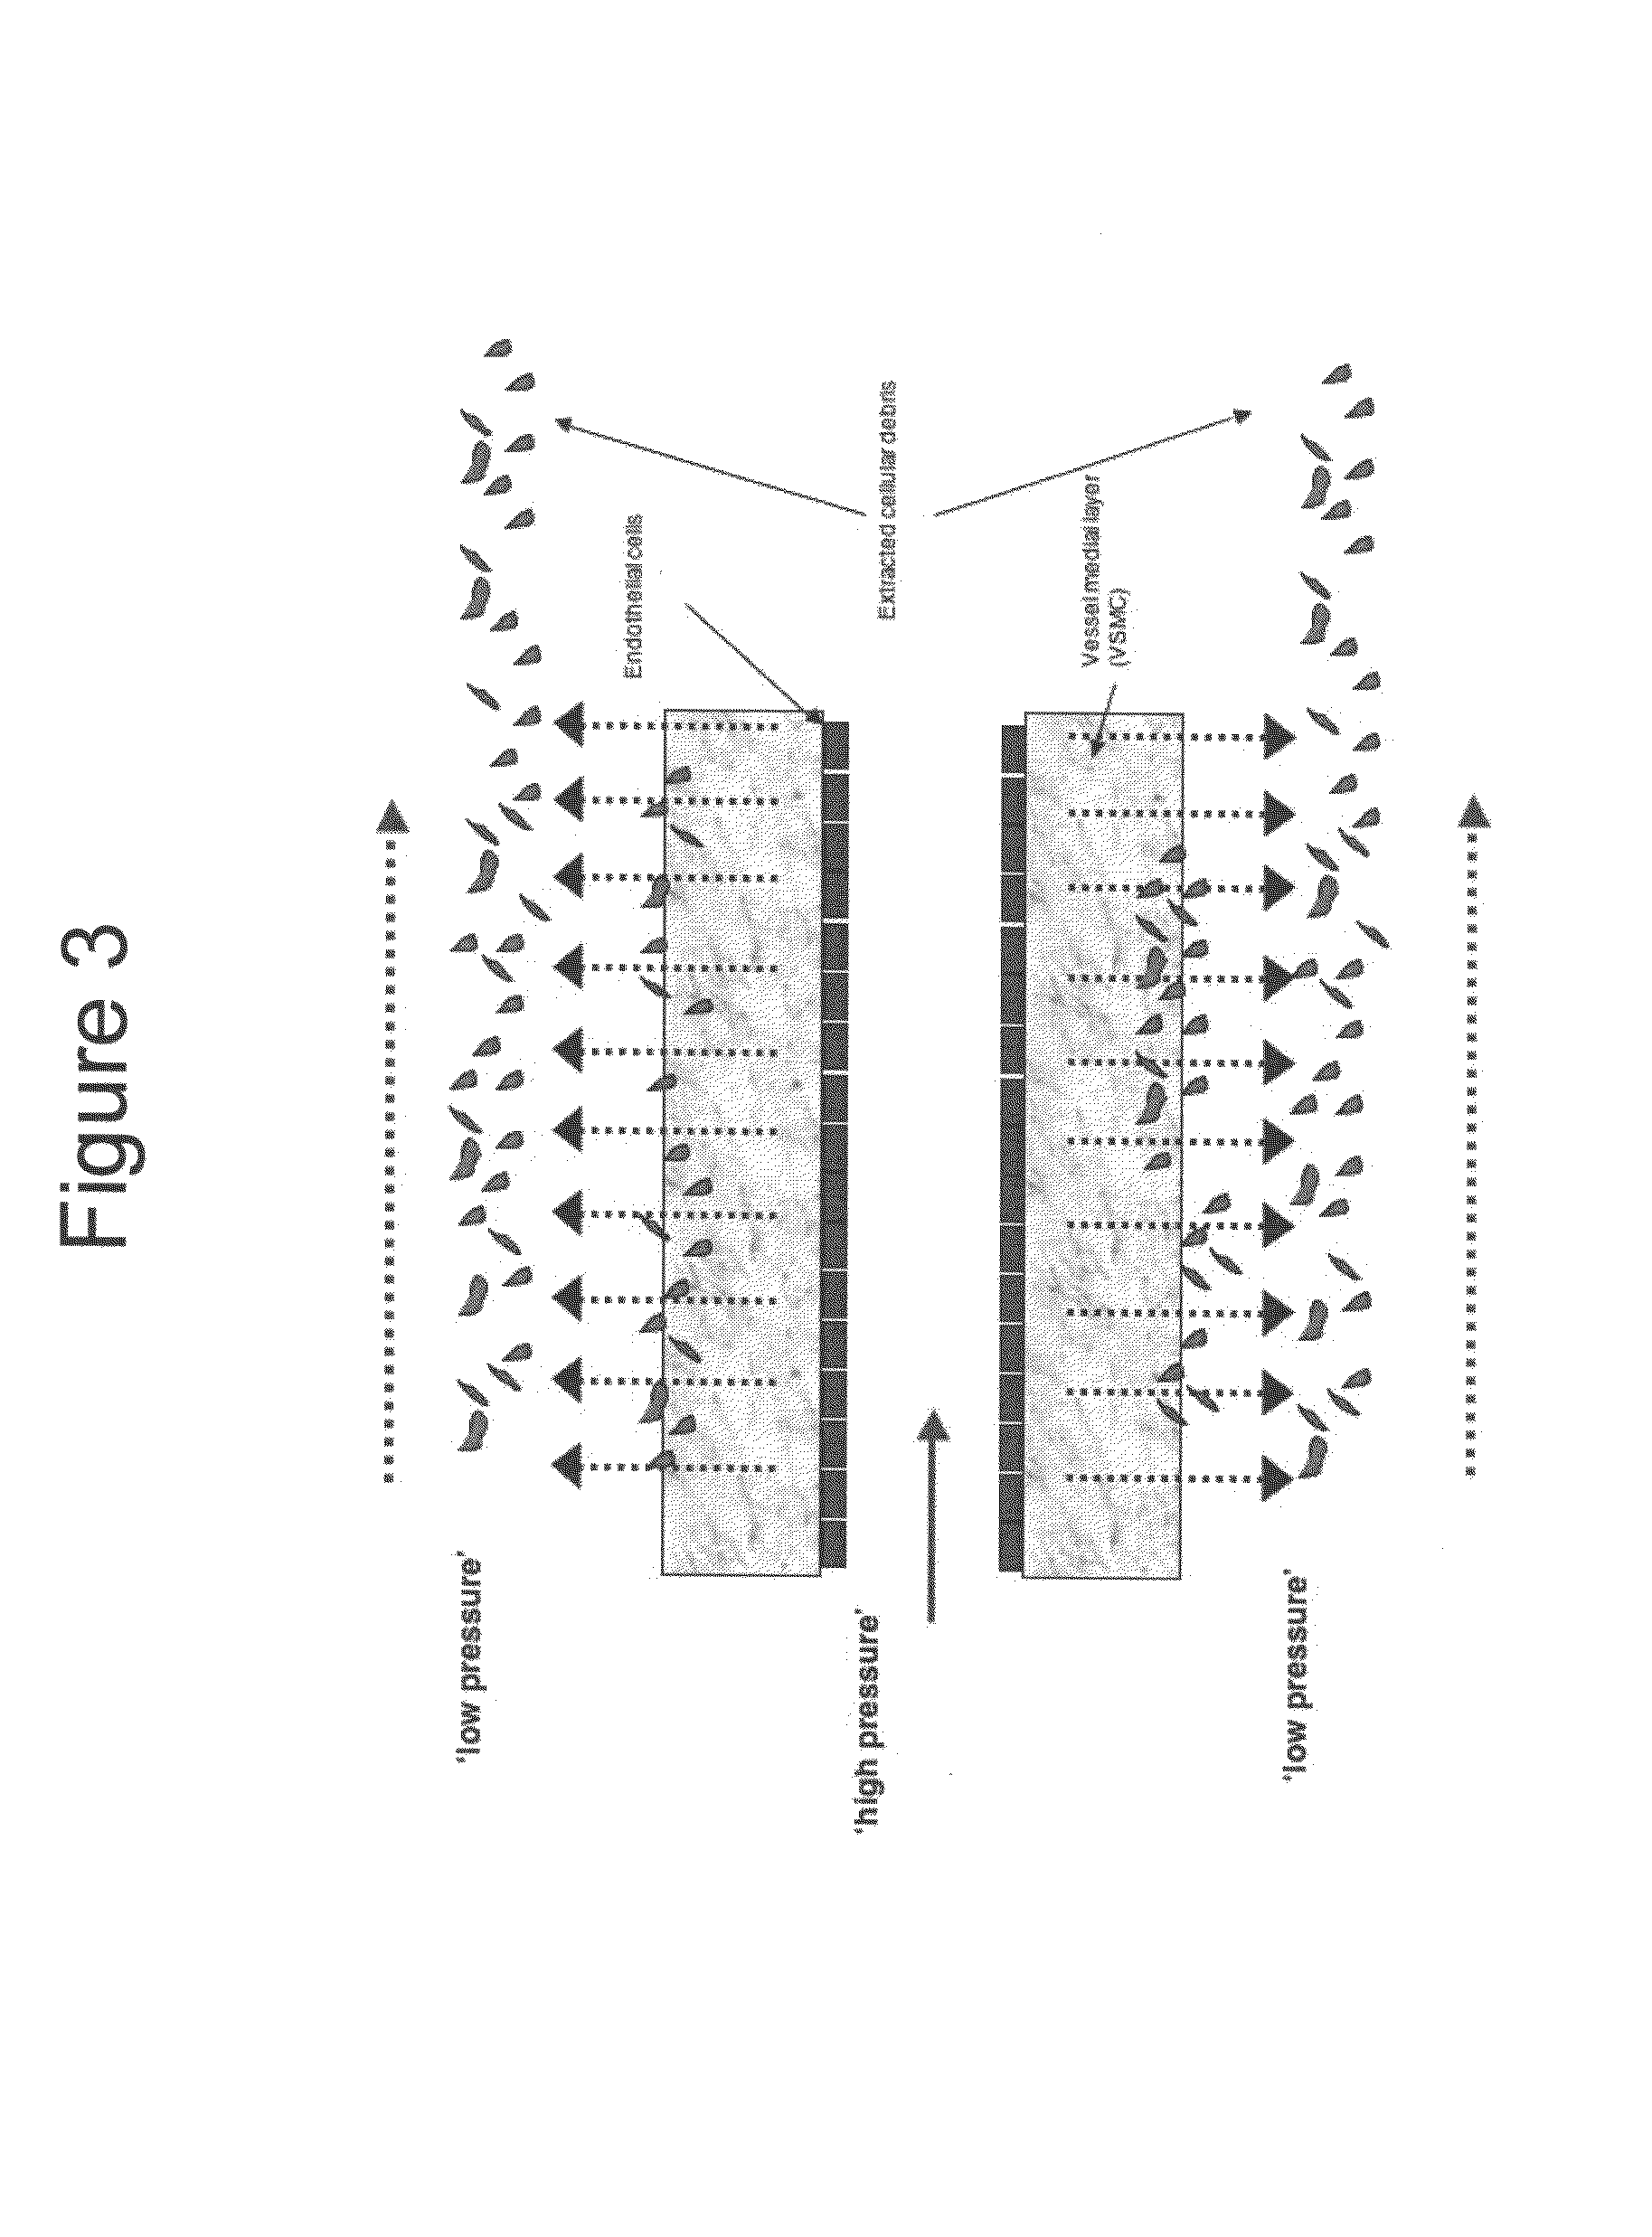 Decellularized grafts from umbilical cord vessels and process for preparing and using same